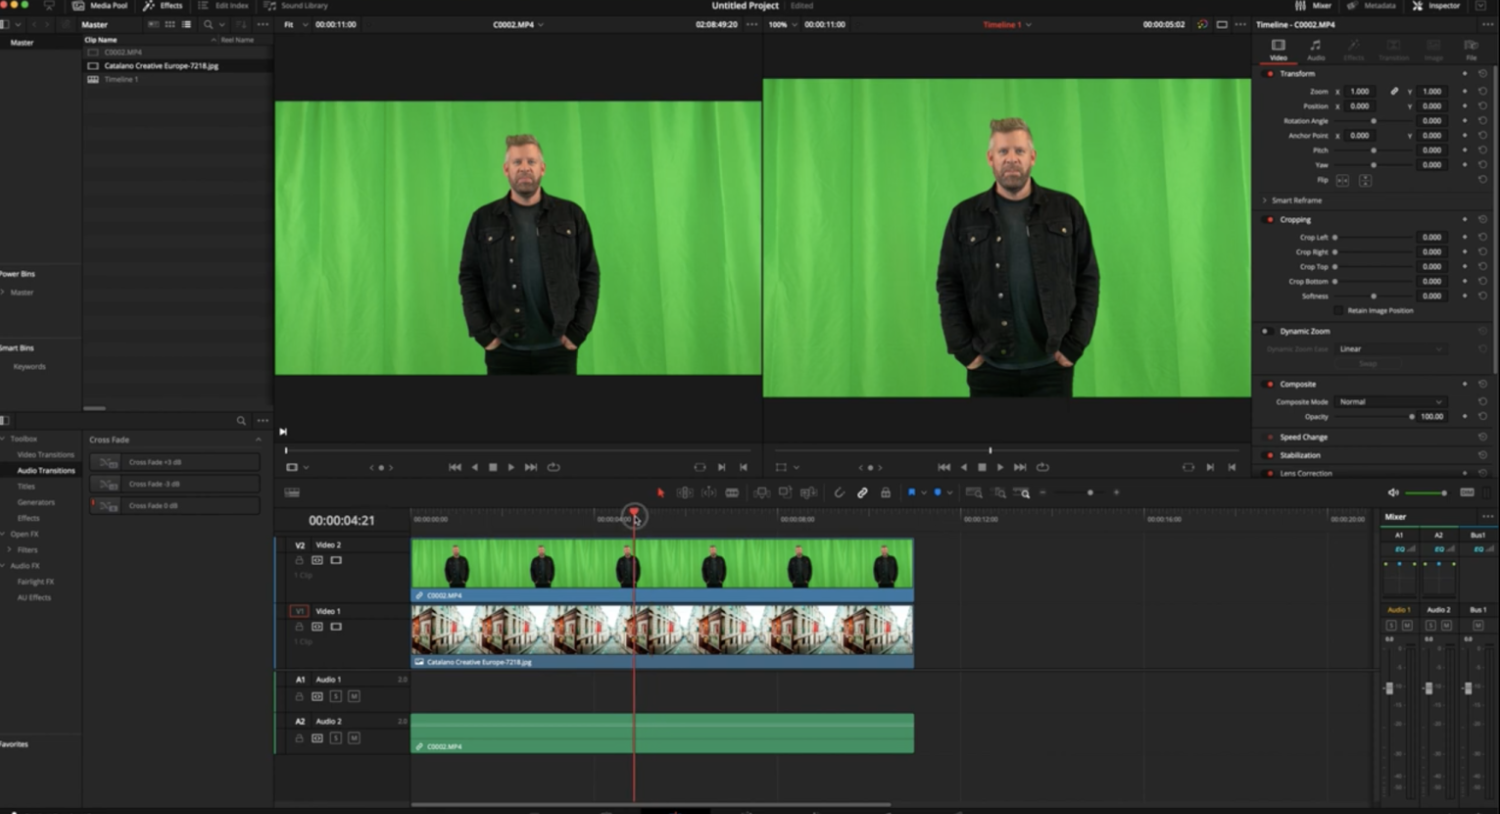 How to edit greenscreen footage in DaVinci Resolve?